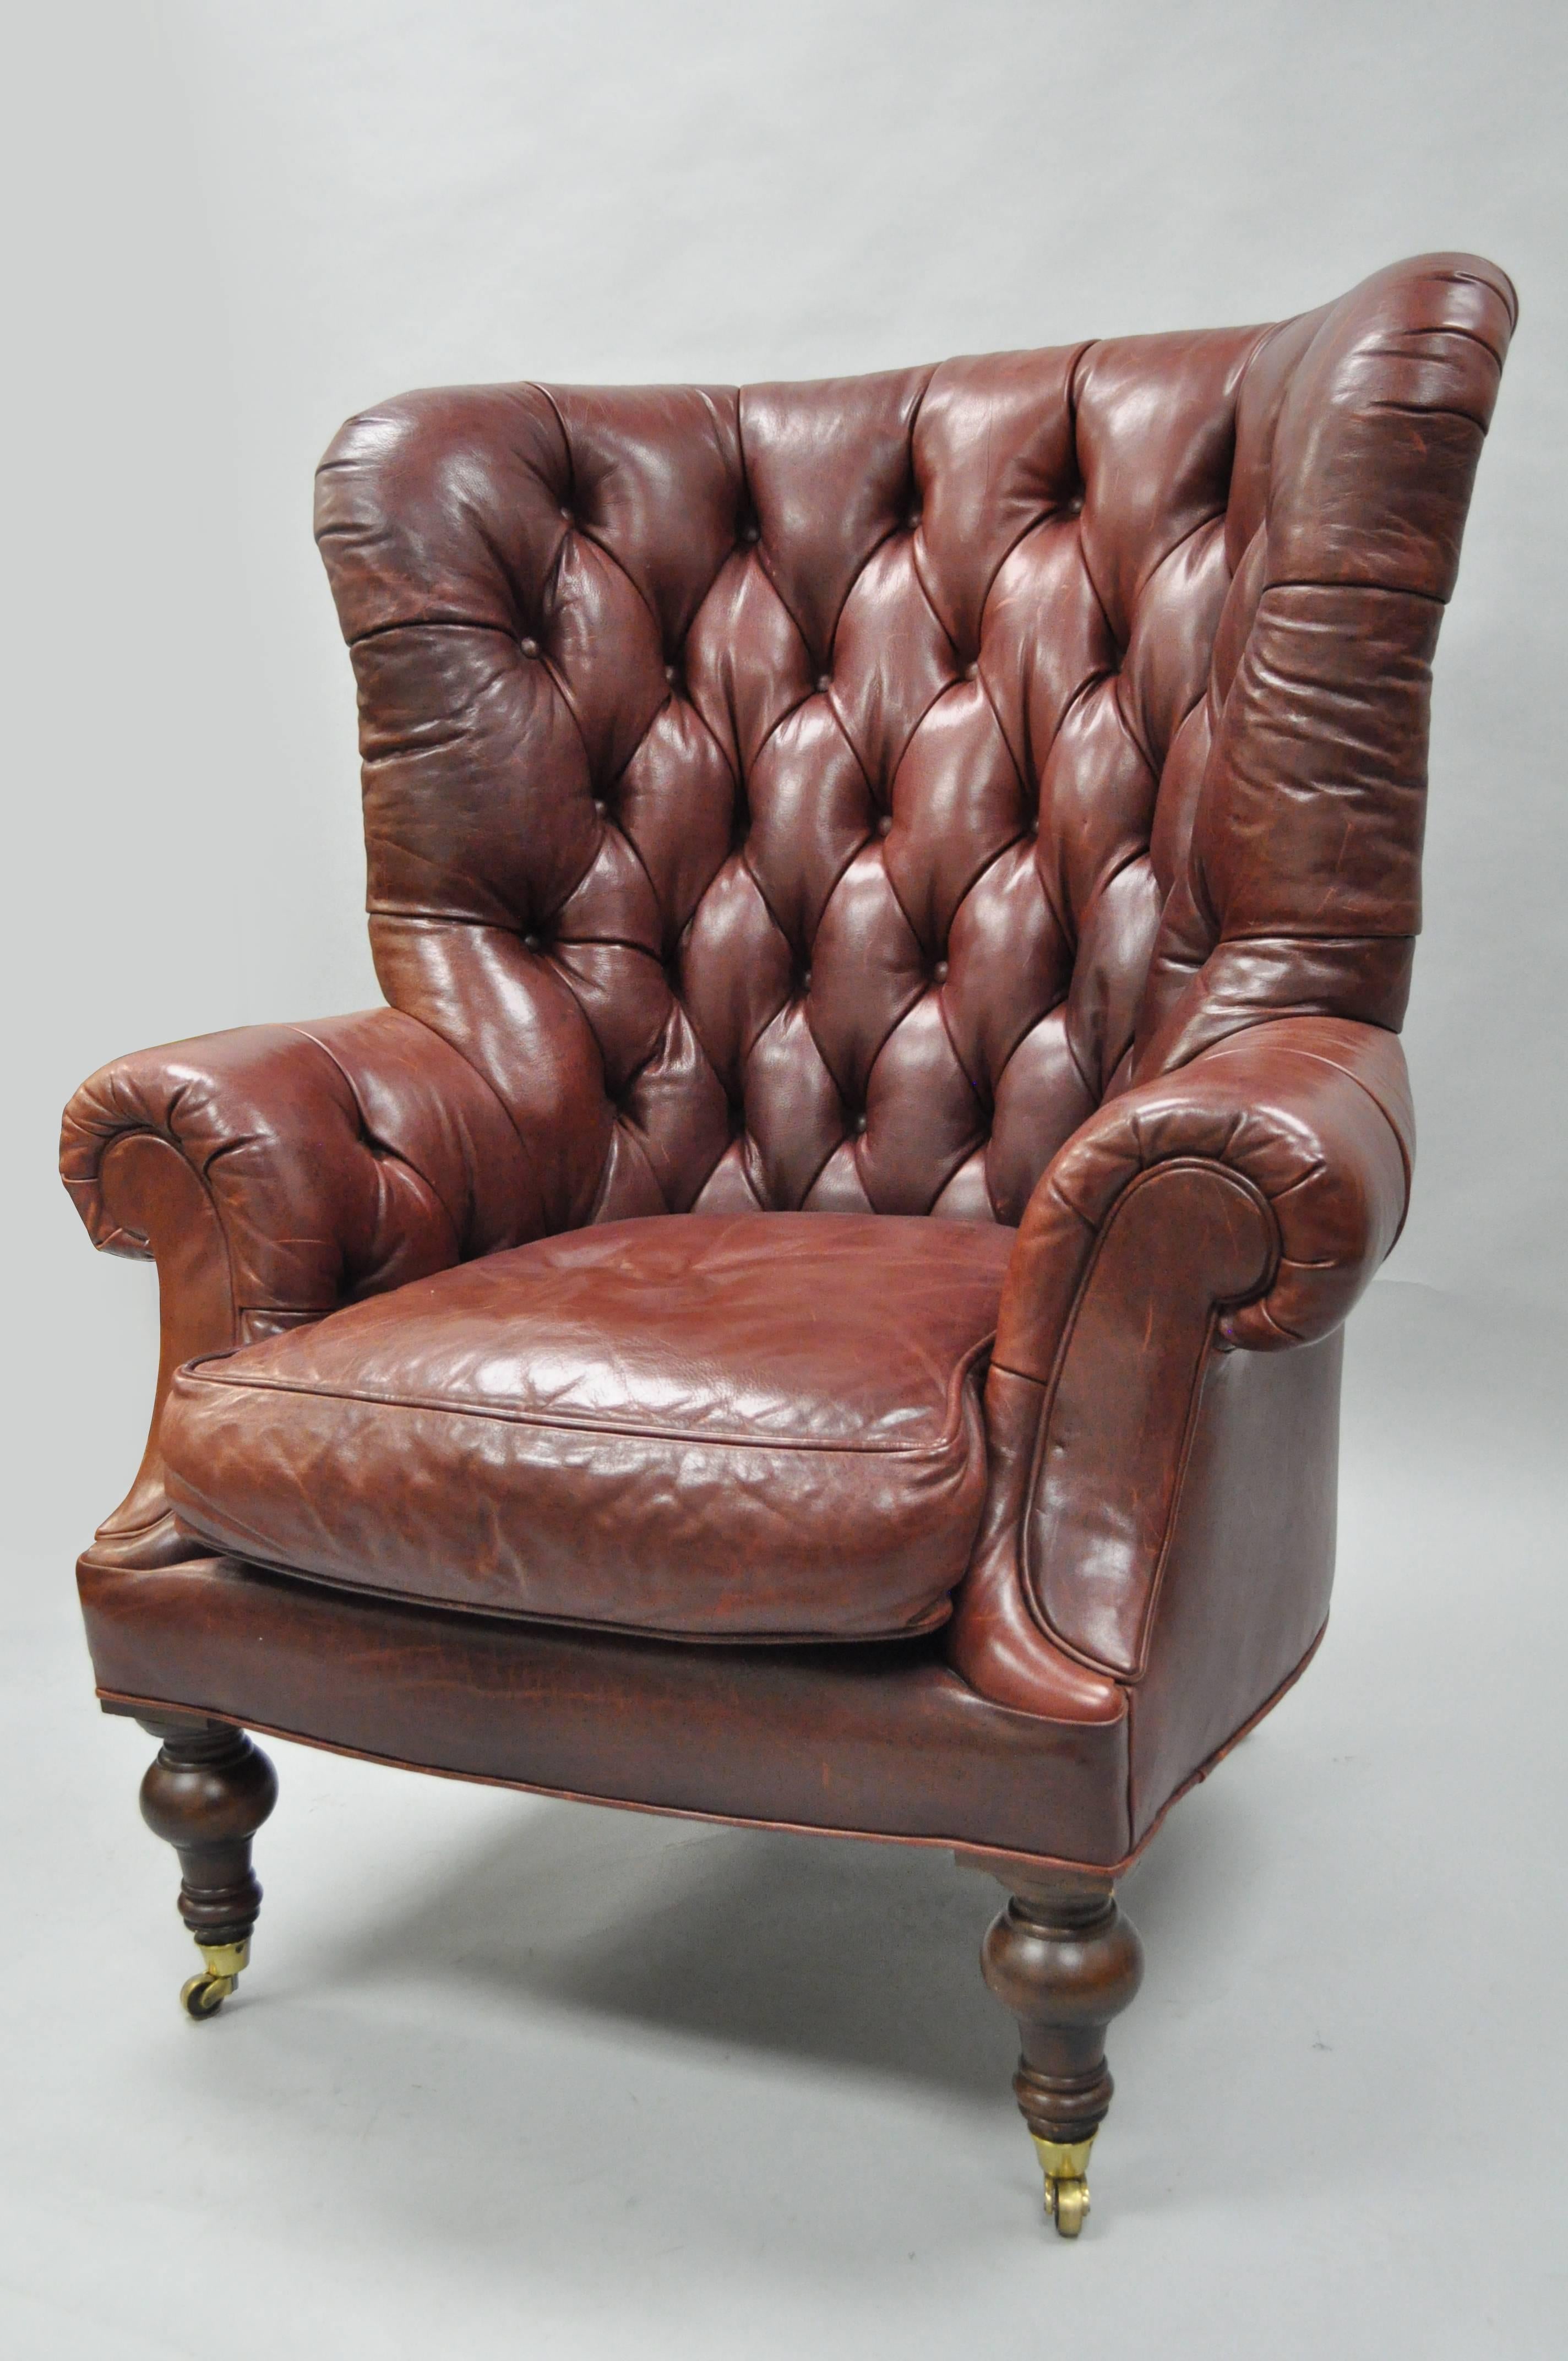 Oversized Lillian August Brown Tufted Leather English Chesterfield Wing Chair 2